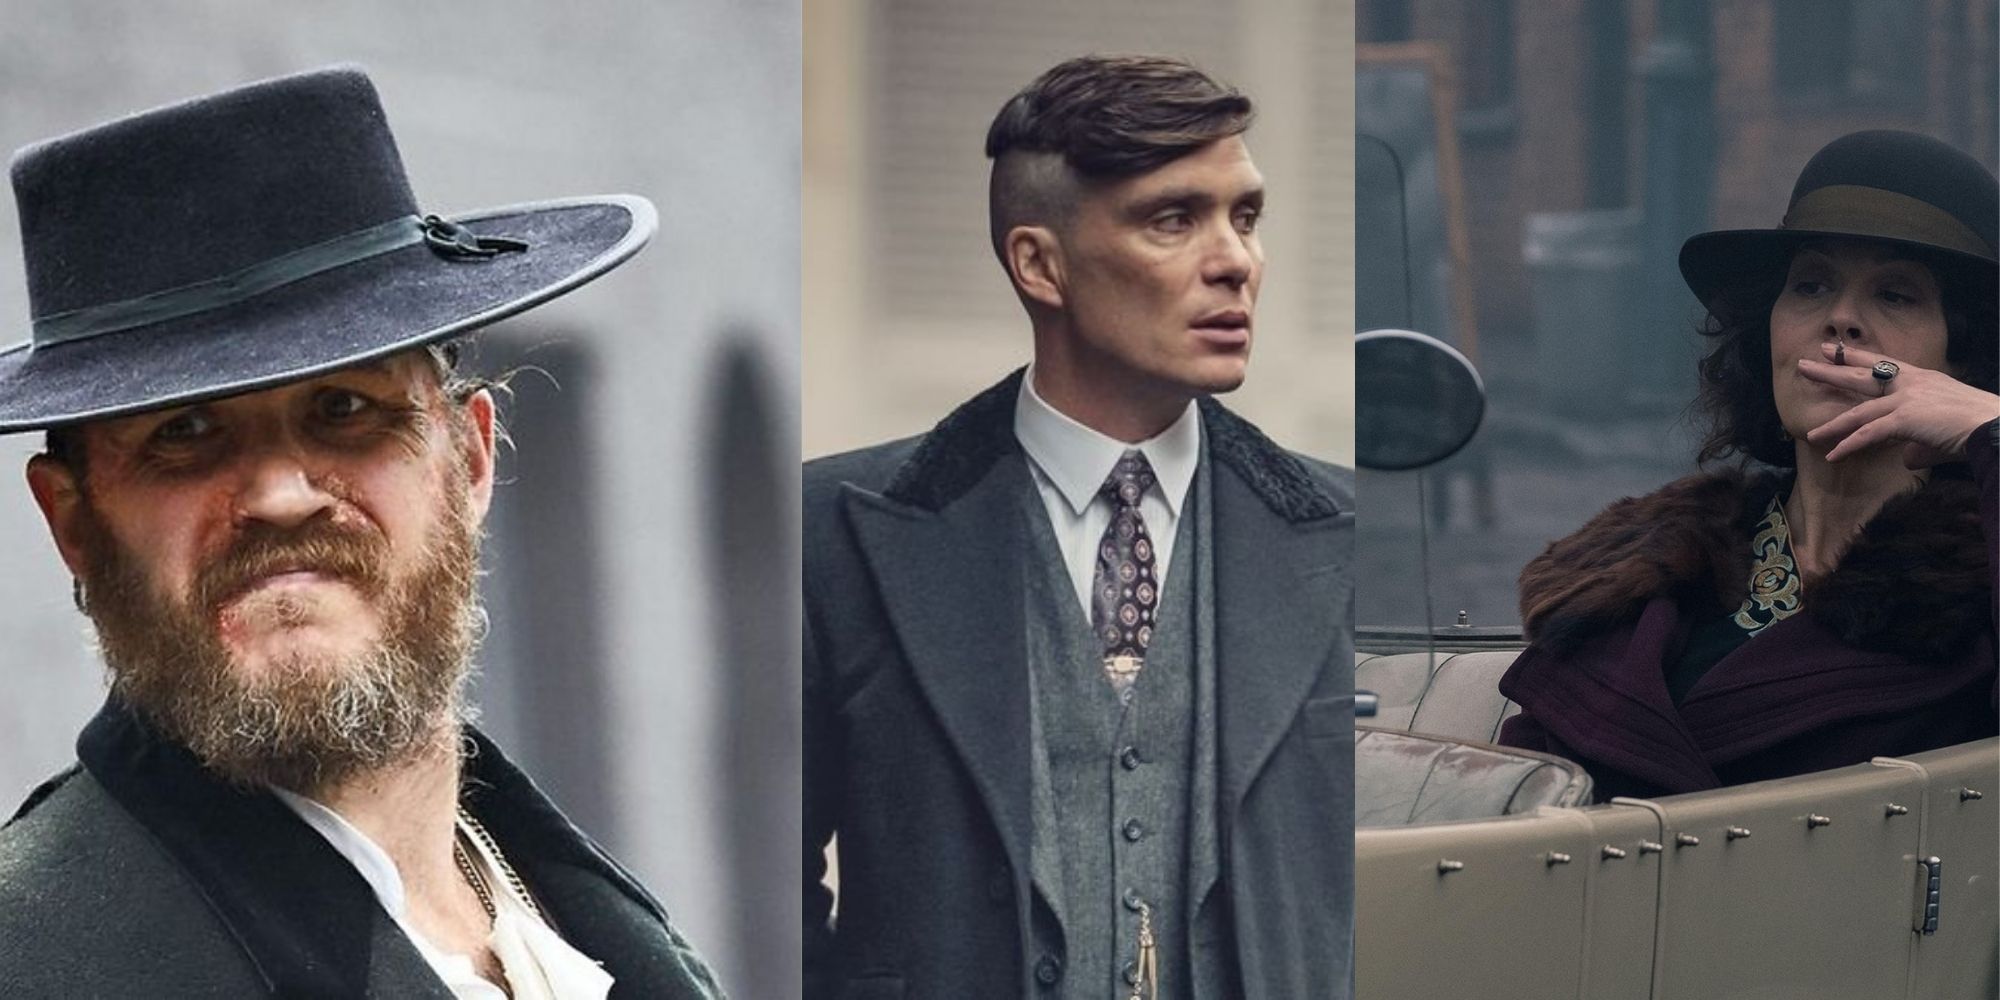 Split image of characters Alfie Solomons, Tommy Shelby, and Polly Gray from Peaky Blinders.